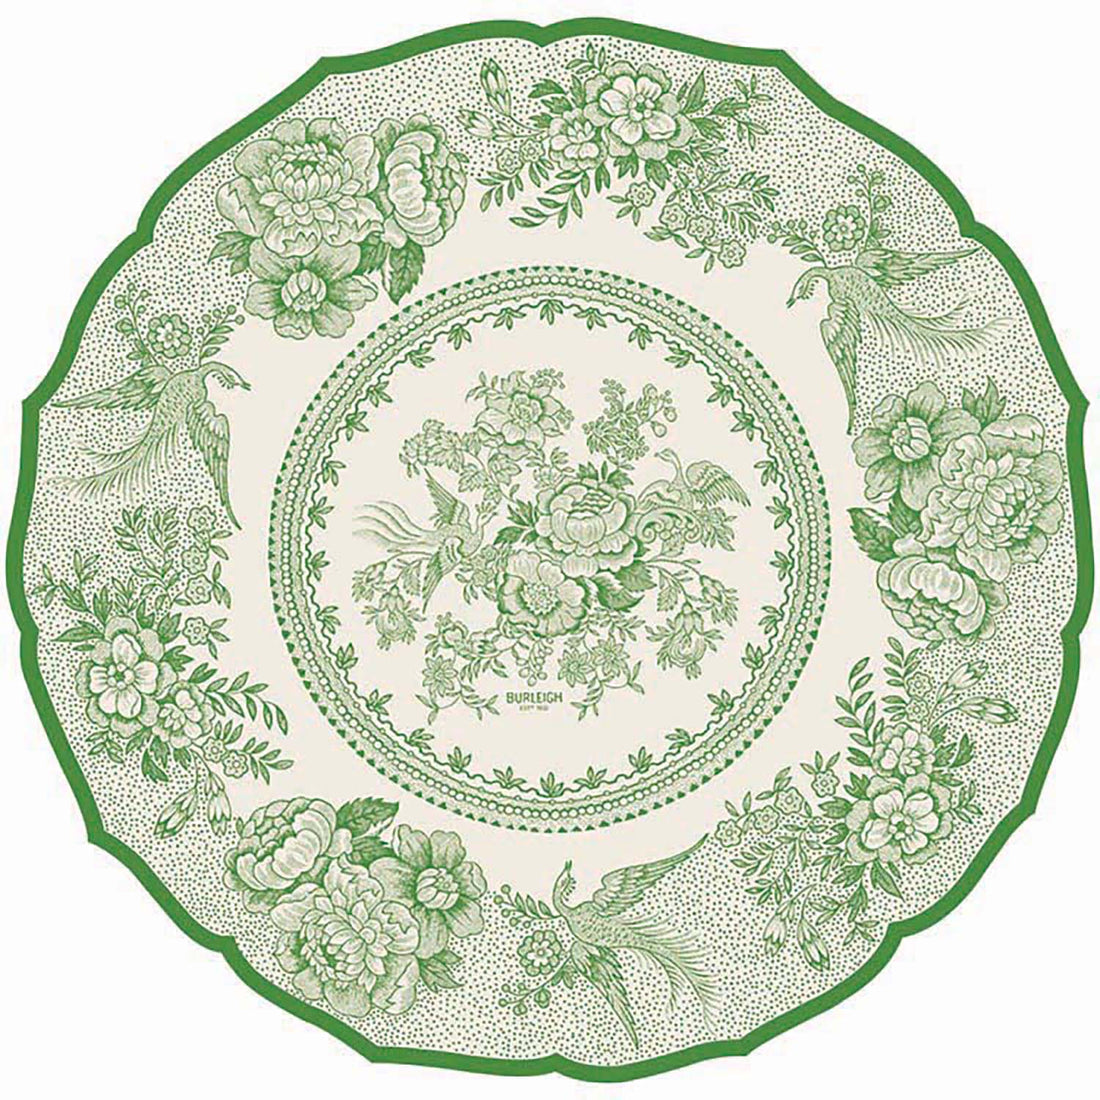 An elegant Die-cut Green Asiatic Pheasants Placemat from Hester &amp; Cook with a floral design.